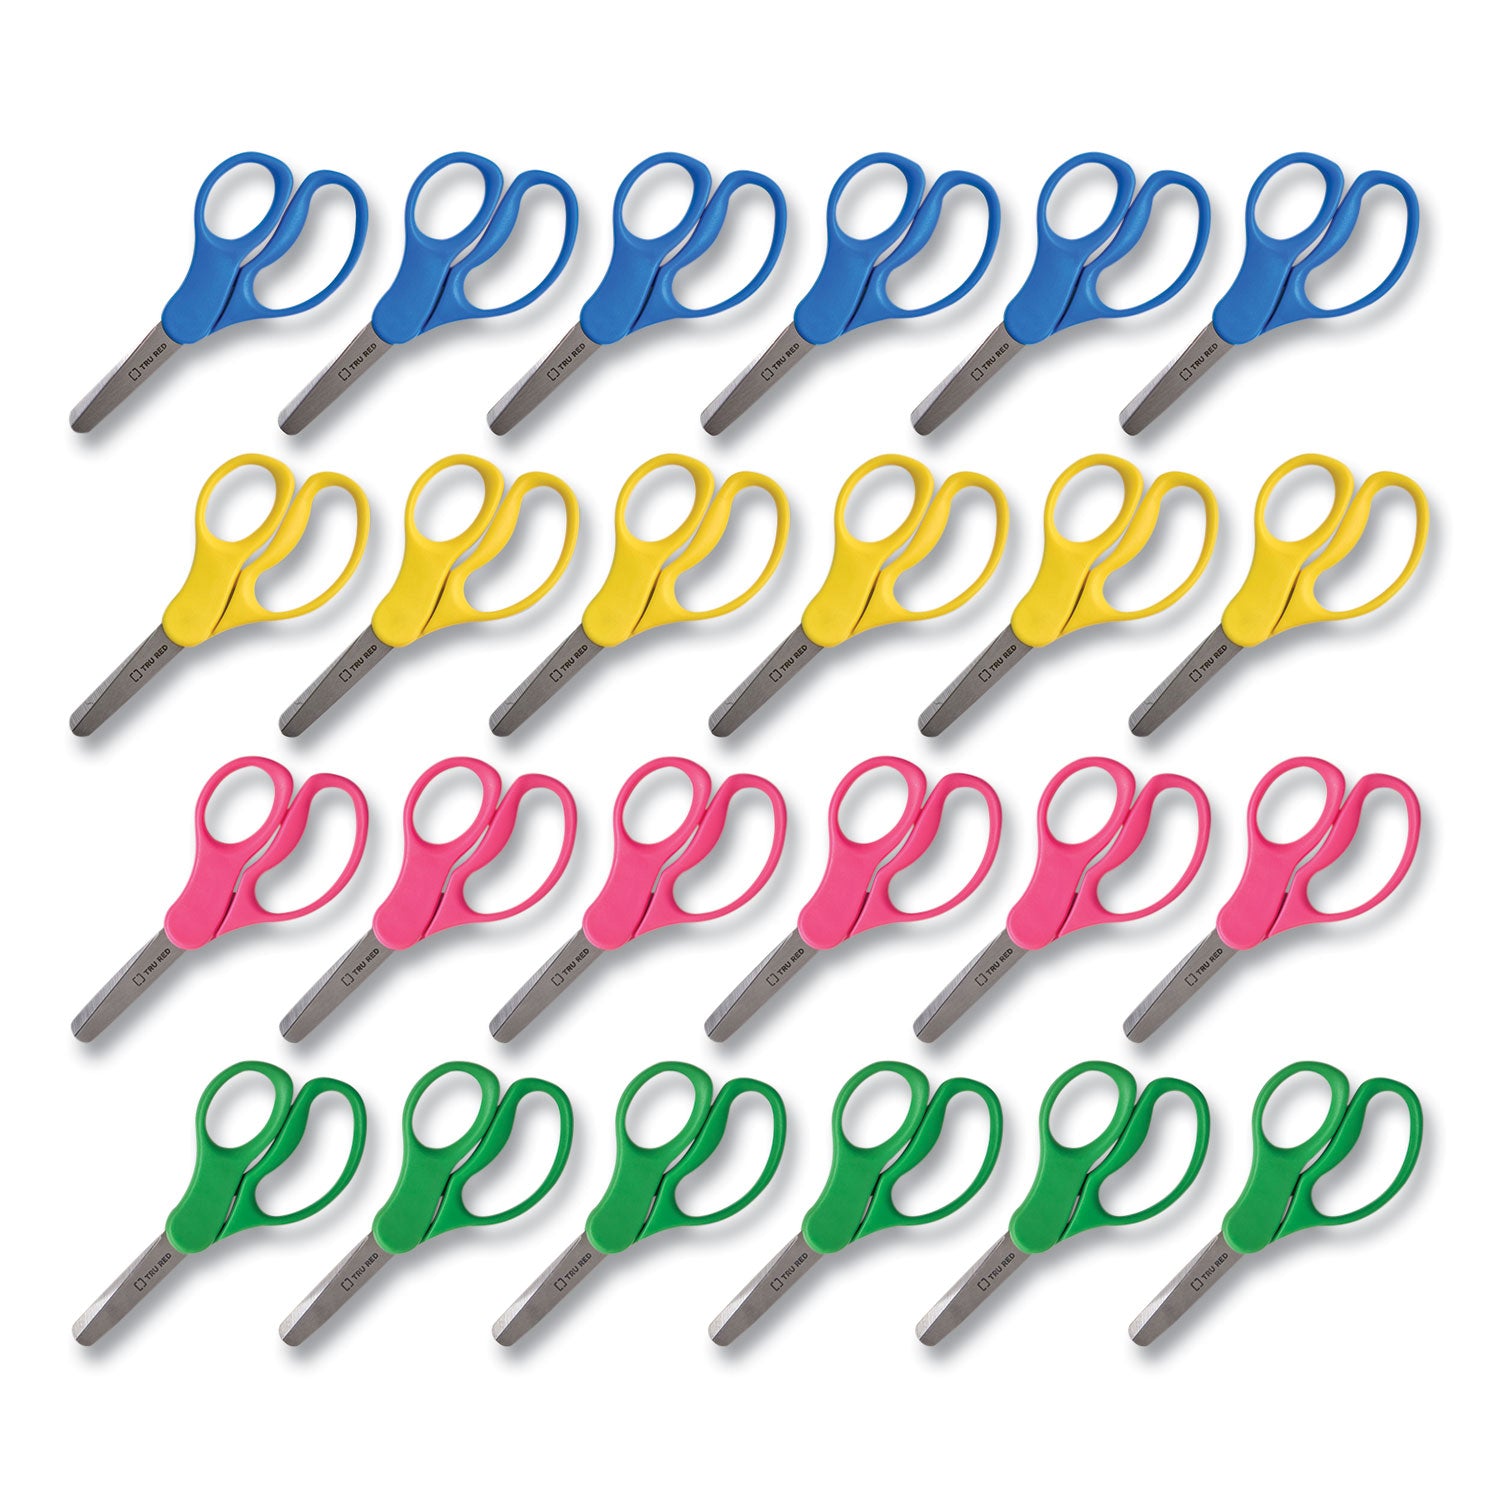 kids-blunt-tip-stainless-steel-safety-scissors-5-long-205-cut-length-assorted-straight-handles-24-pack_tud24380511 - 1